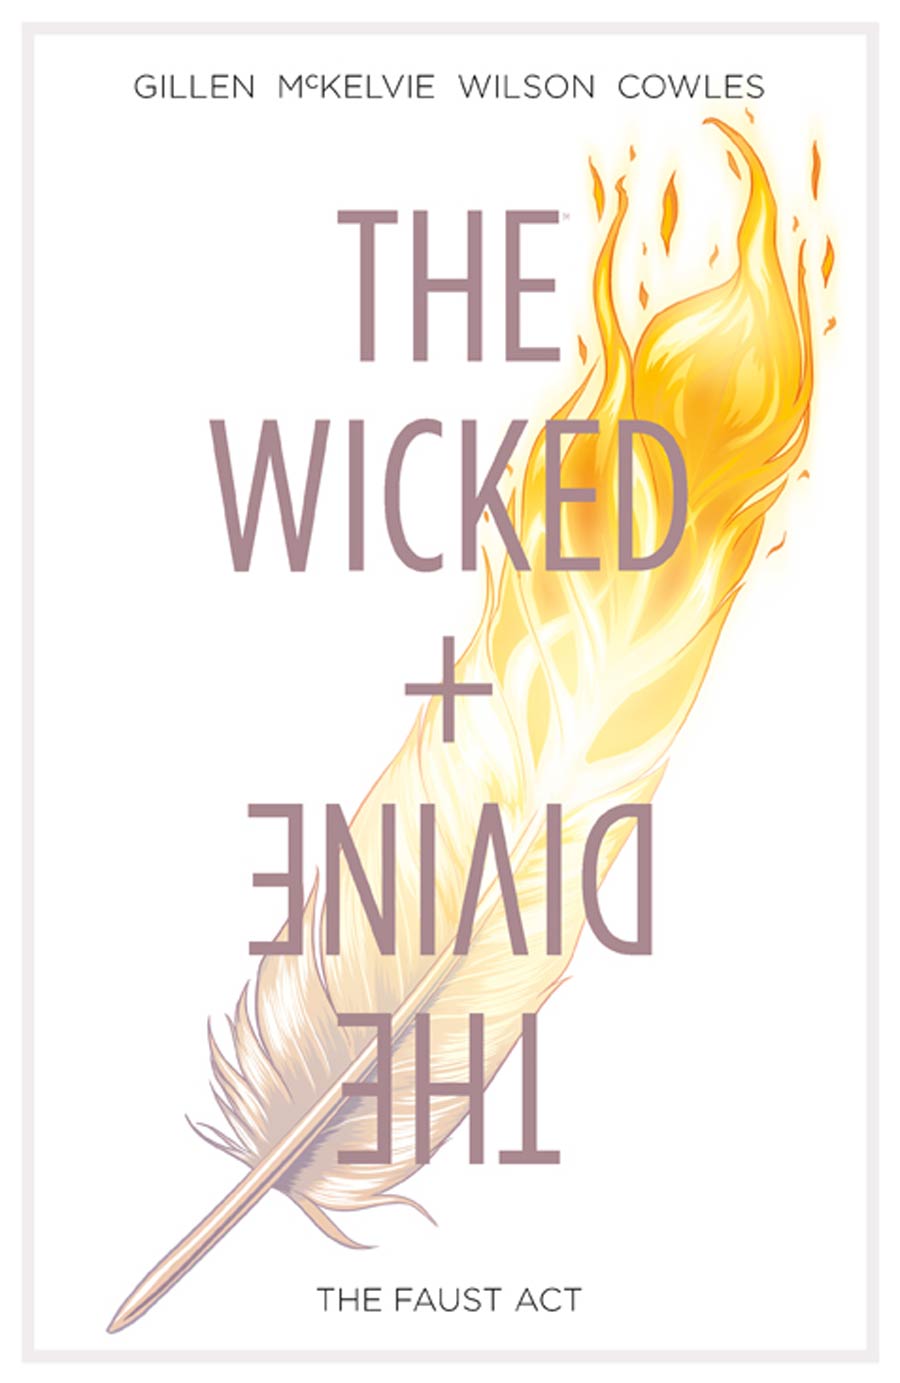 Wicked + the Divine vol. 1 book cover